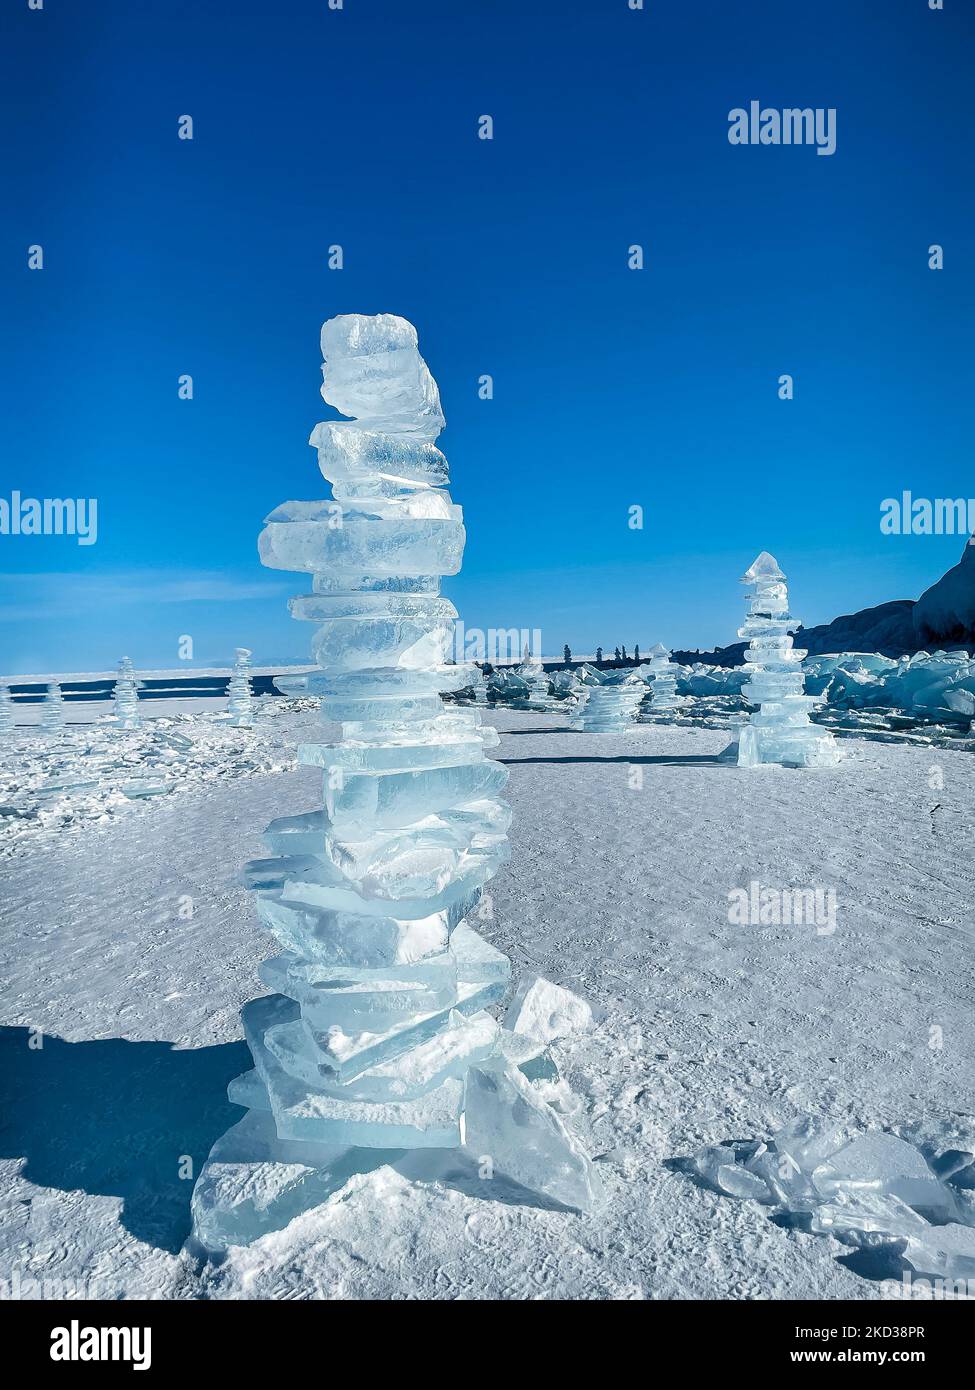 https://c8.alamy.com/comp/2KD38PR/pieces-of-ice-lying-on-the-ideal-smooth-ice-of-baikal-with-ice-hummocks-in-the-horizon-sun-is-shining-through-the-sides-of-ice-cubes-floes-look-like-2KD38PR.jpg